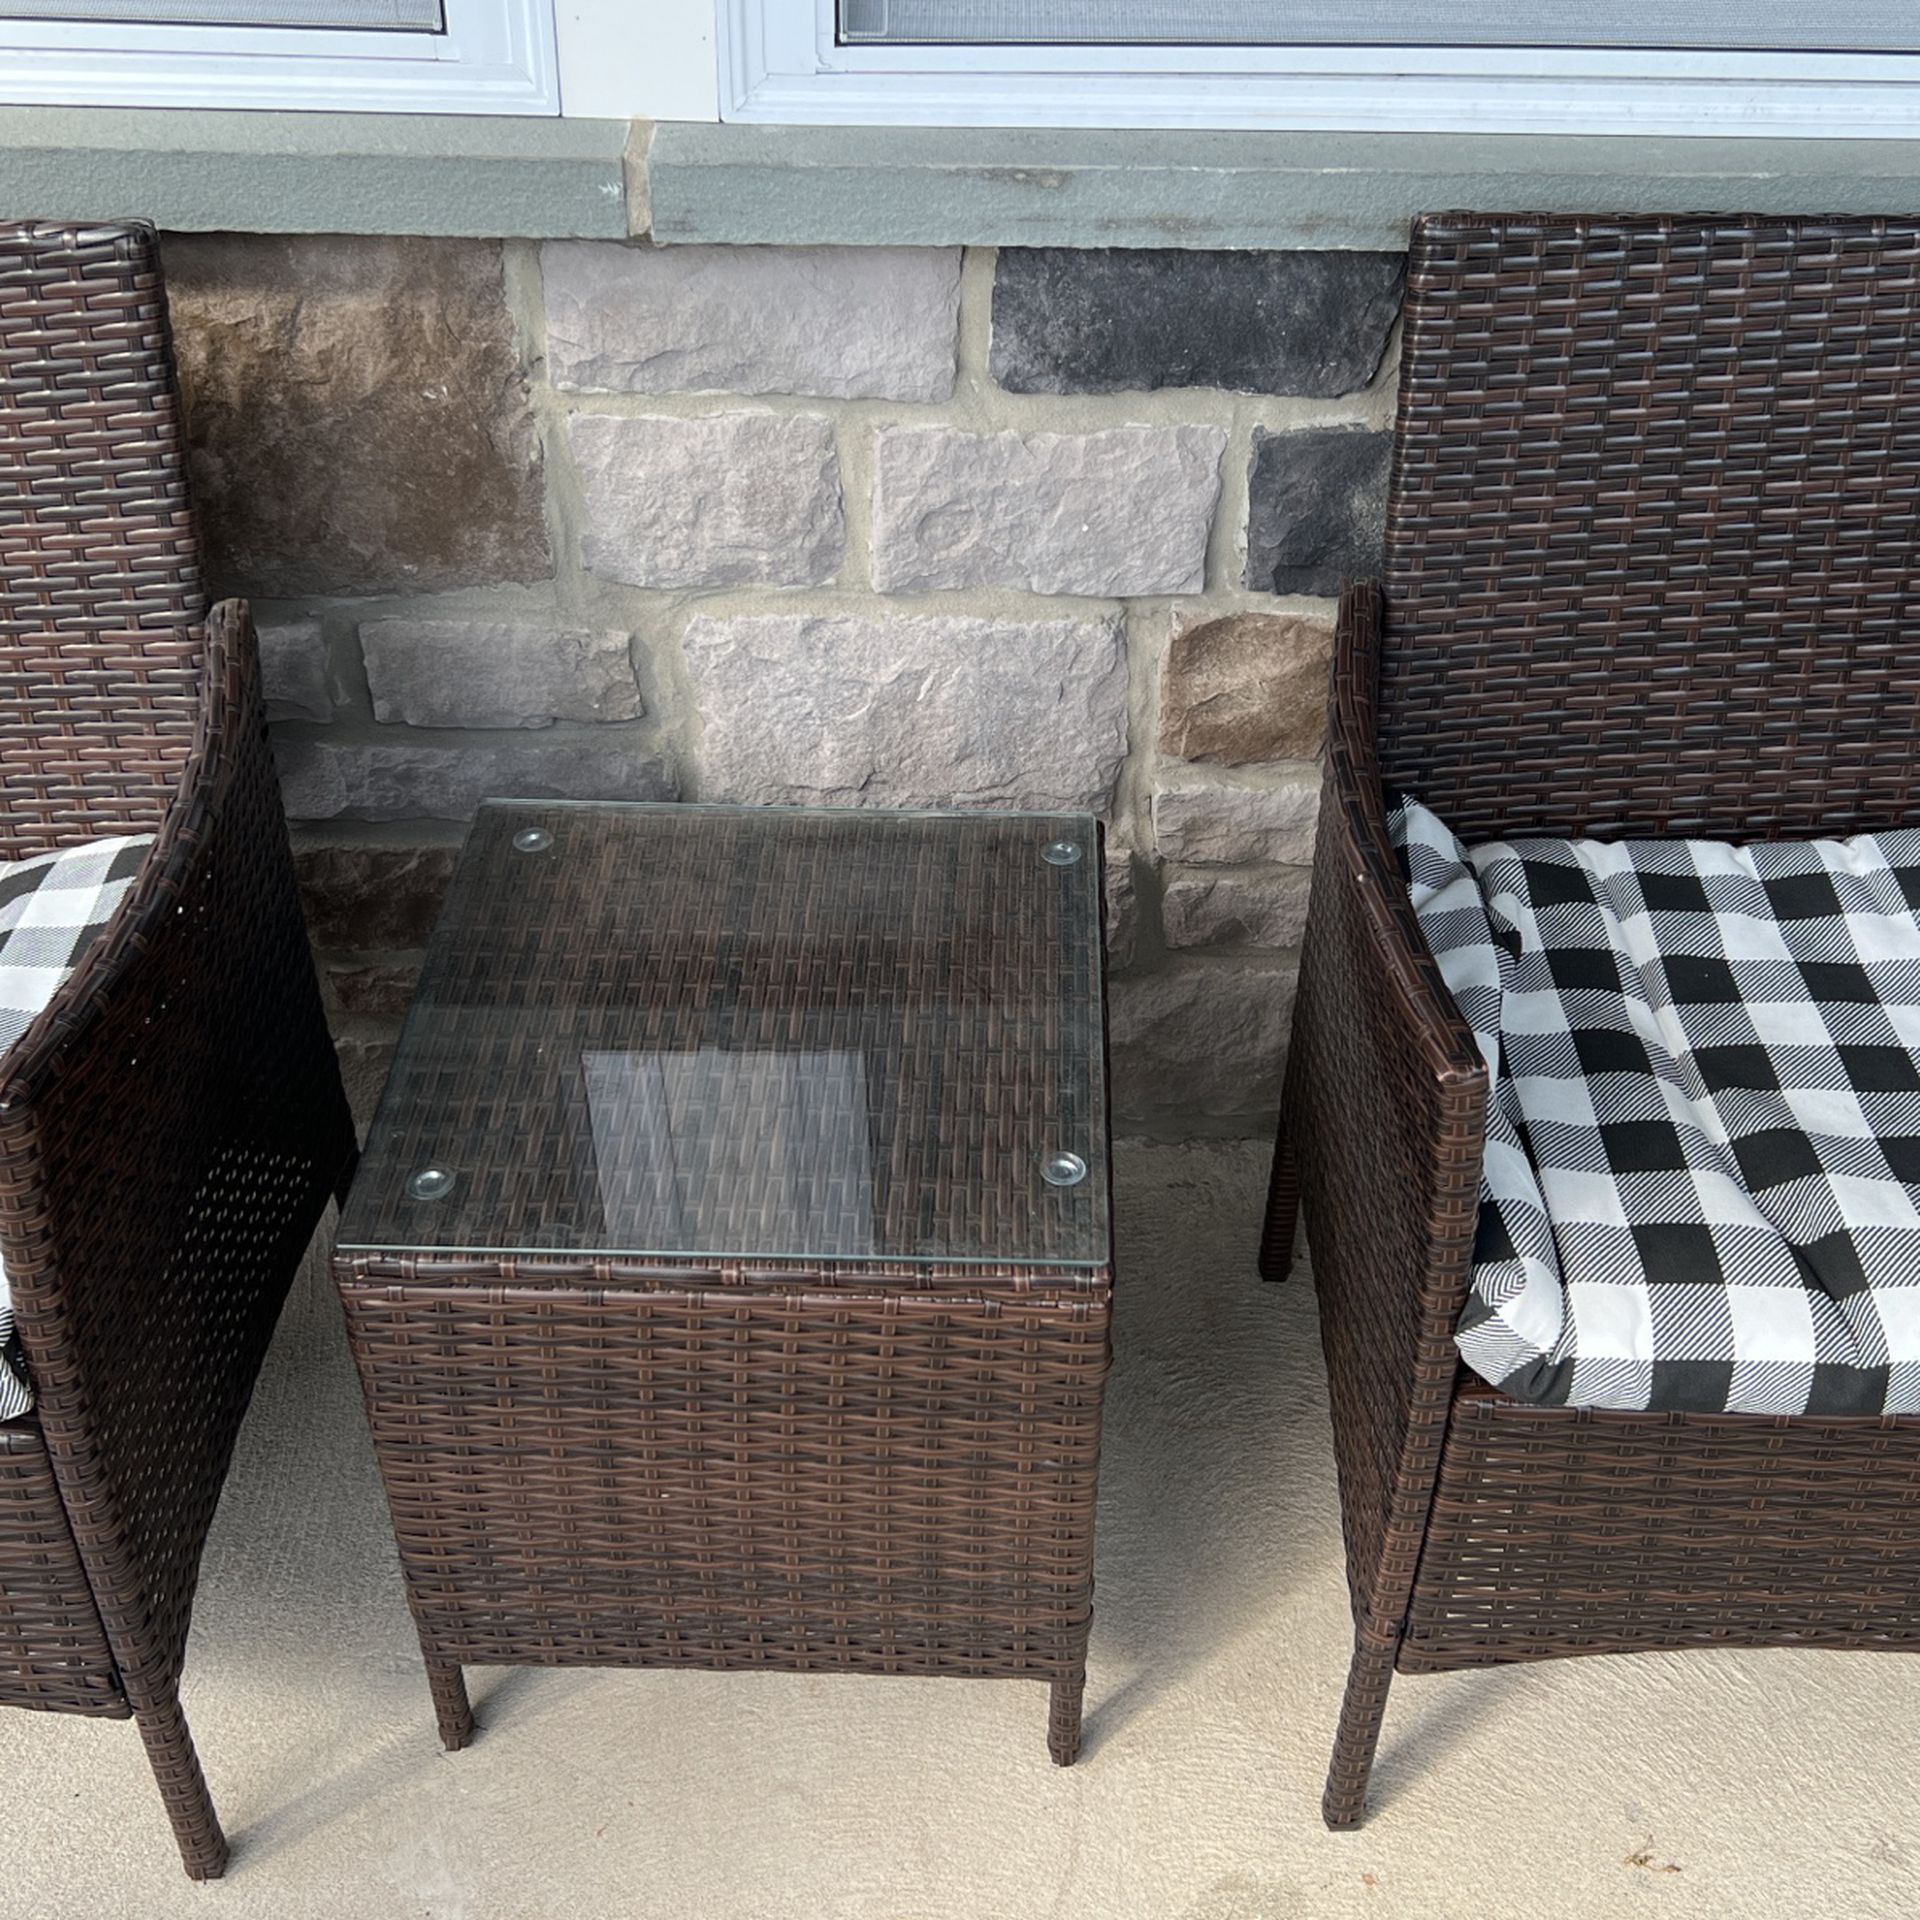 Wicker Set 2 Chairs And Glass Table Top. Used Good Condition 